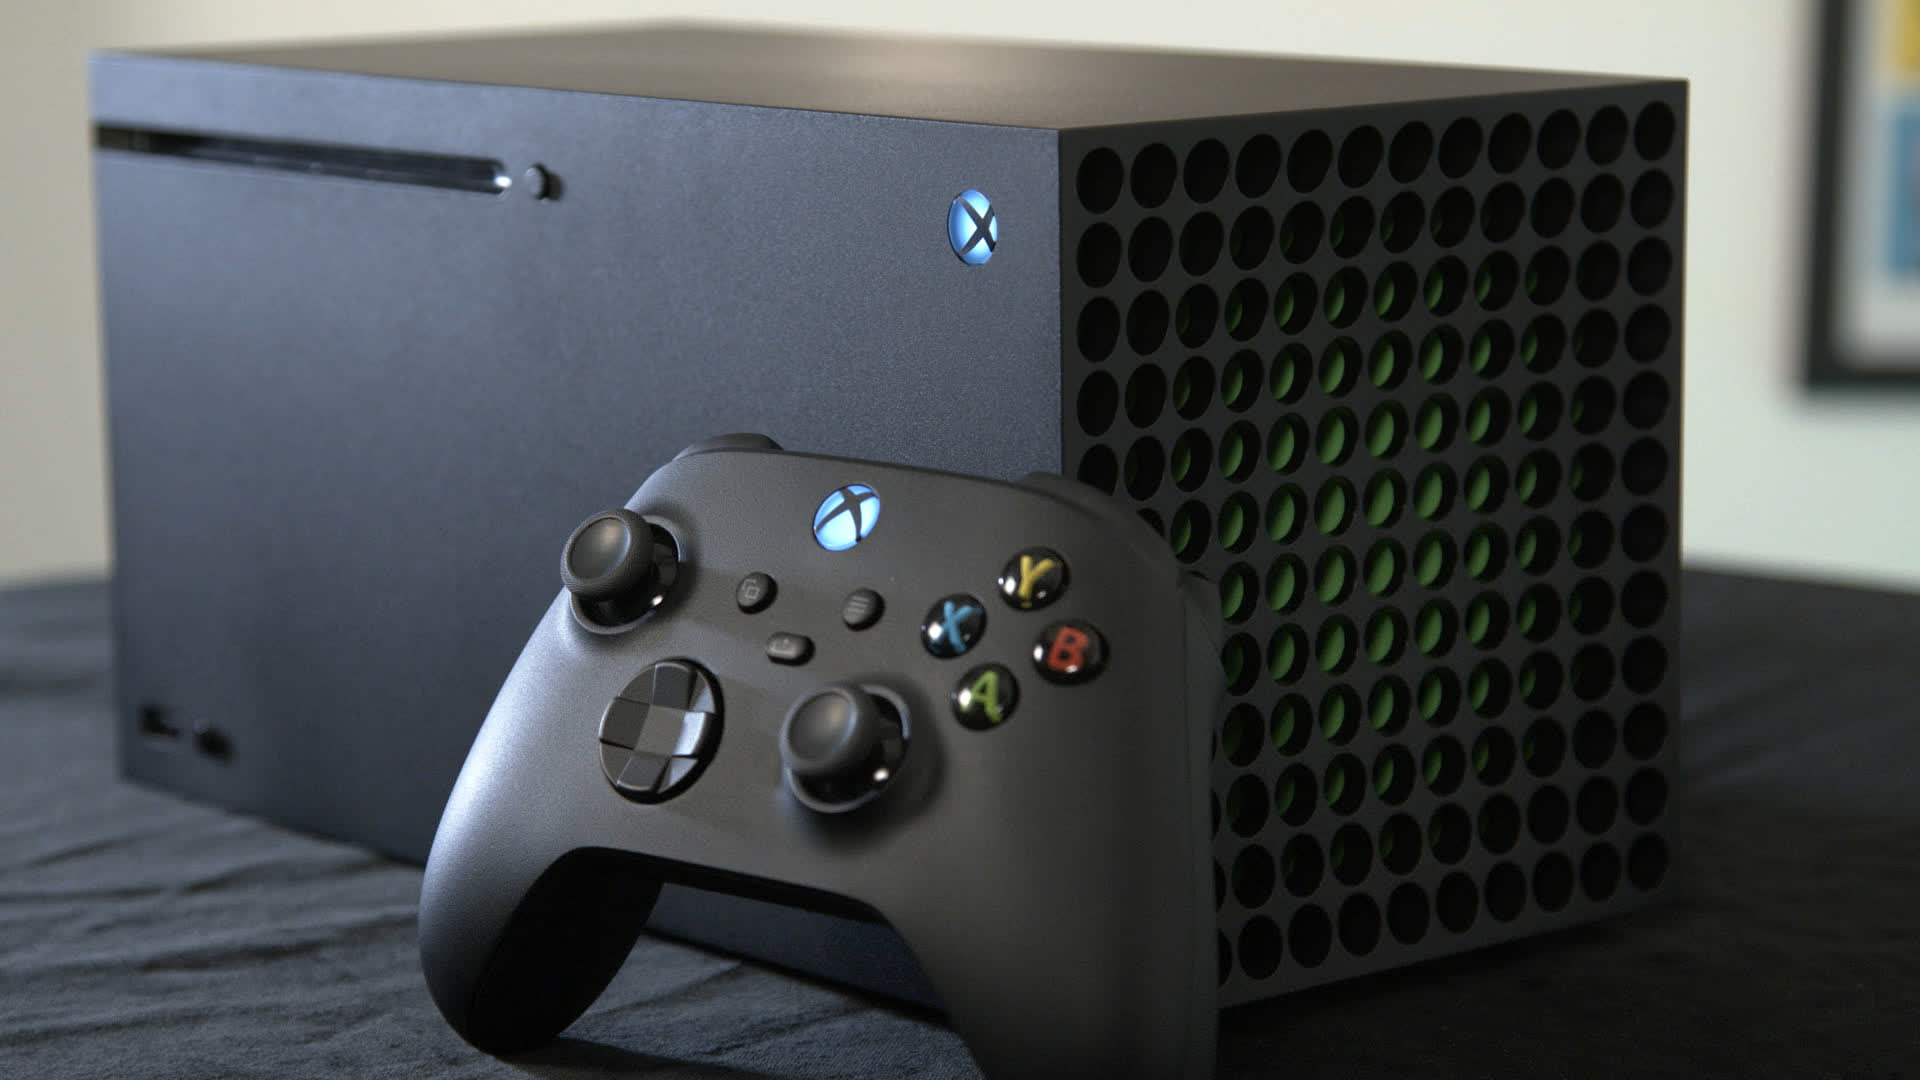 Microsoft is hiring engineers to develop AI-based upscaling tech for the Xbox Series X